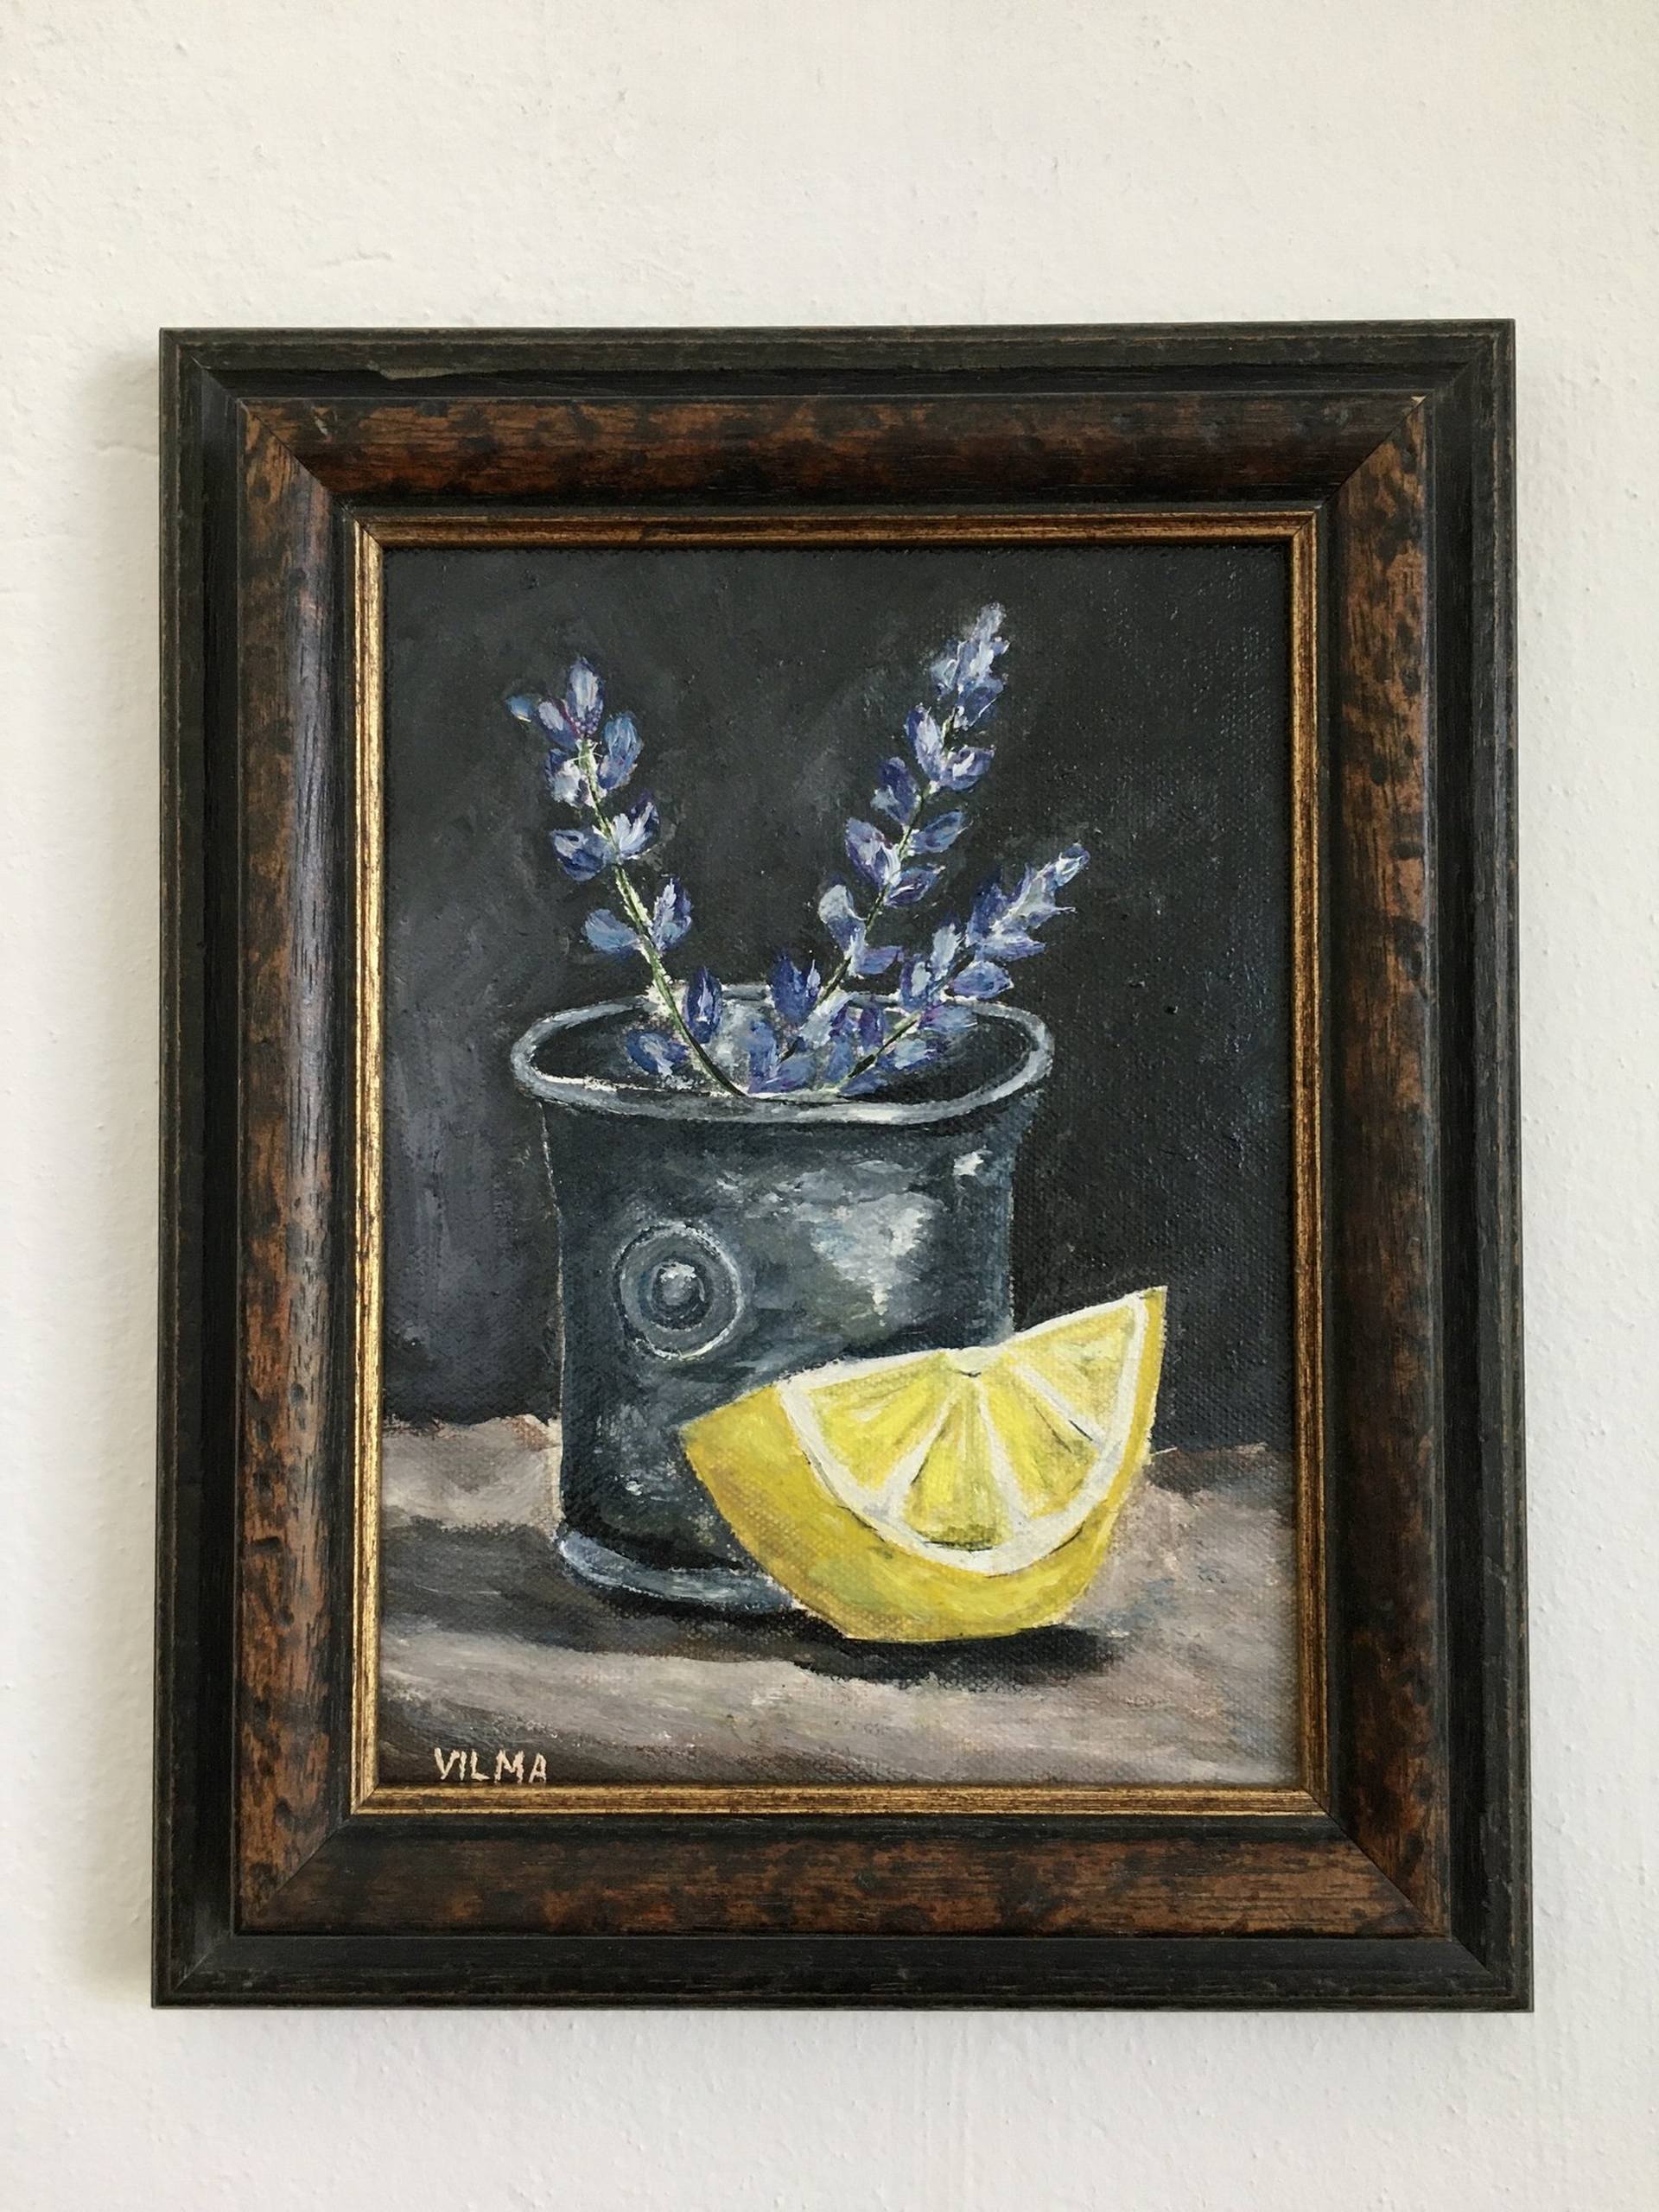 Citrus Painting Fruit Original Art Small Oil Painting Canvas Fruit Still Life Food Artwork 7 by 9by ZinaPainting